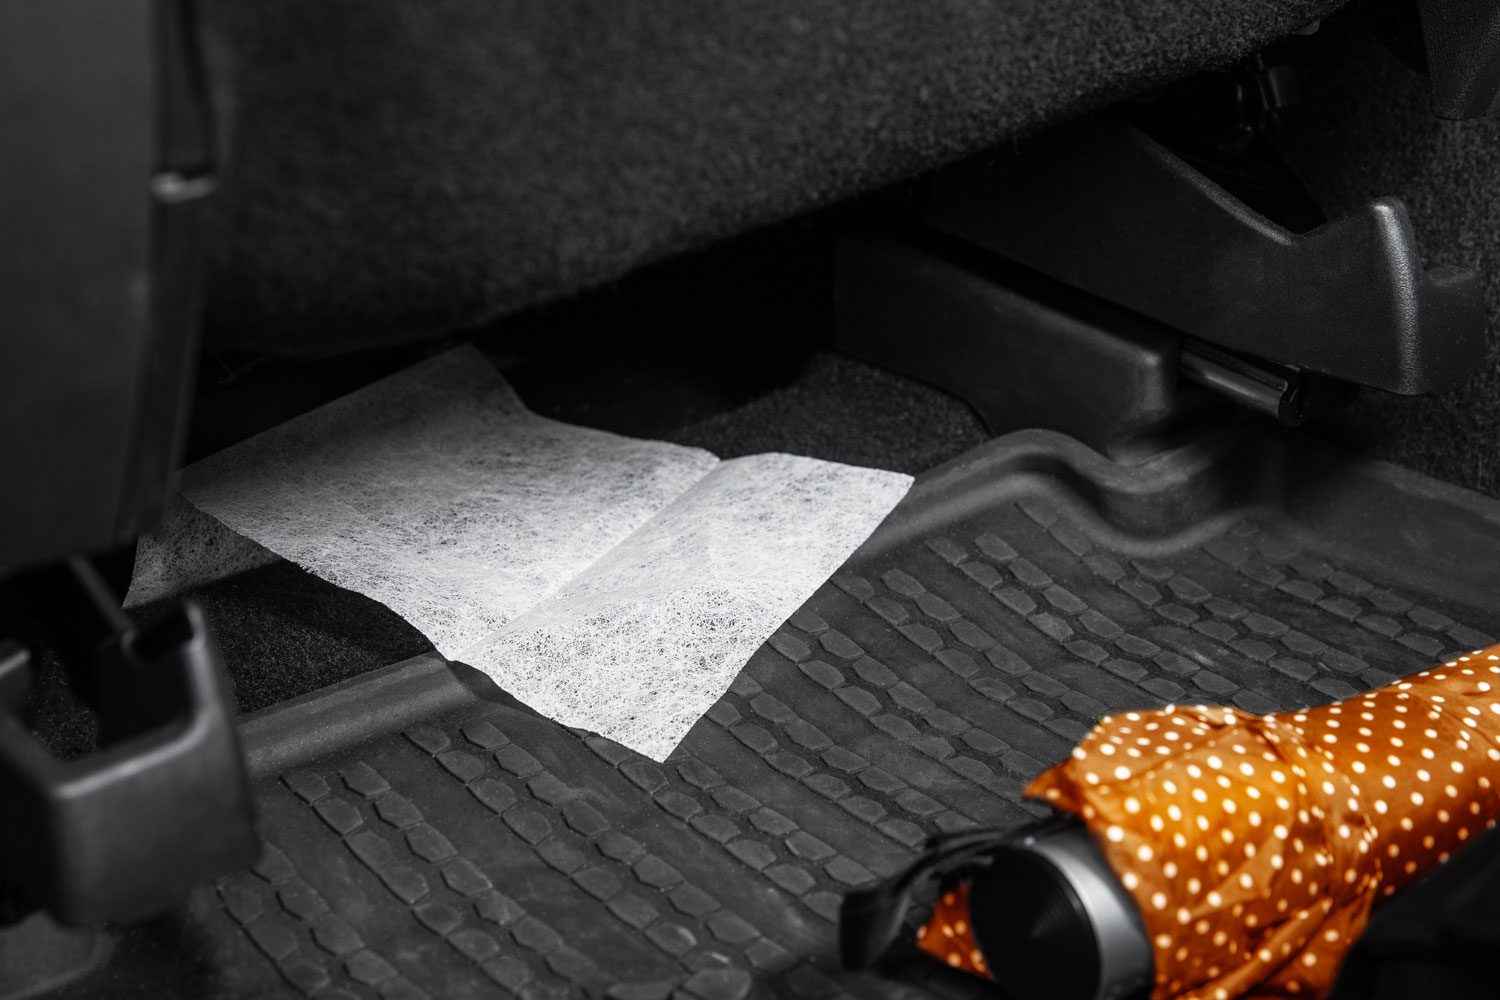 close up of a dryer sheet under a seat of a car; orange umbrella on the car floor nearby